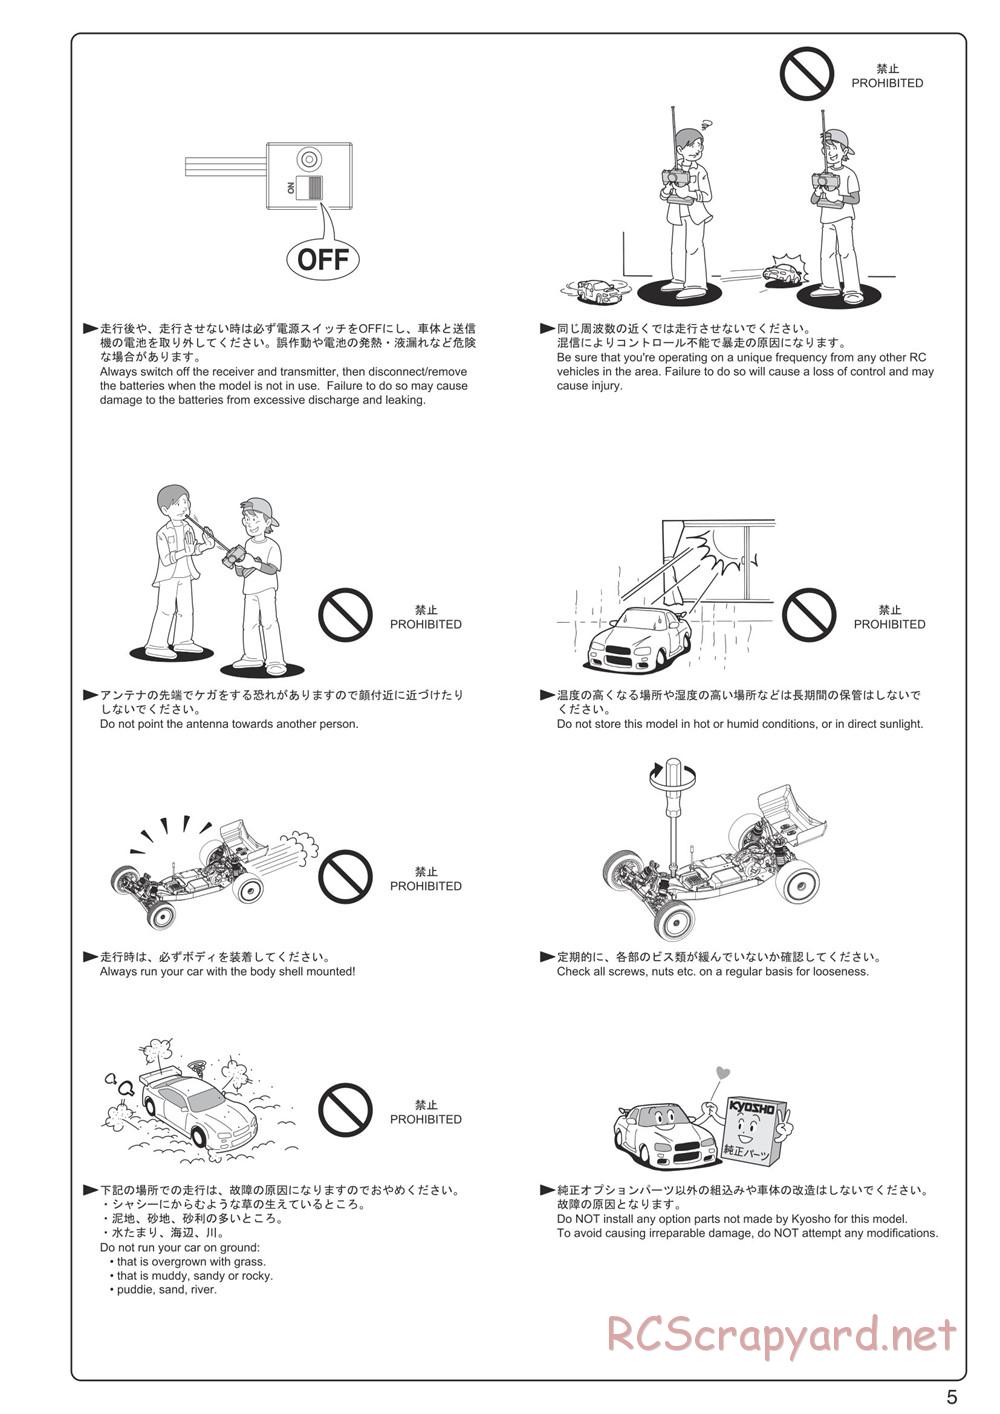 Kyosho - Ultima RB7SS - Manual - Page 5